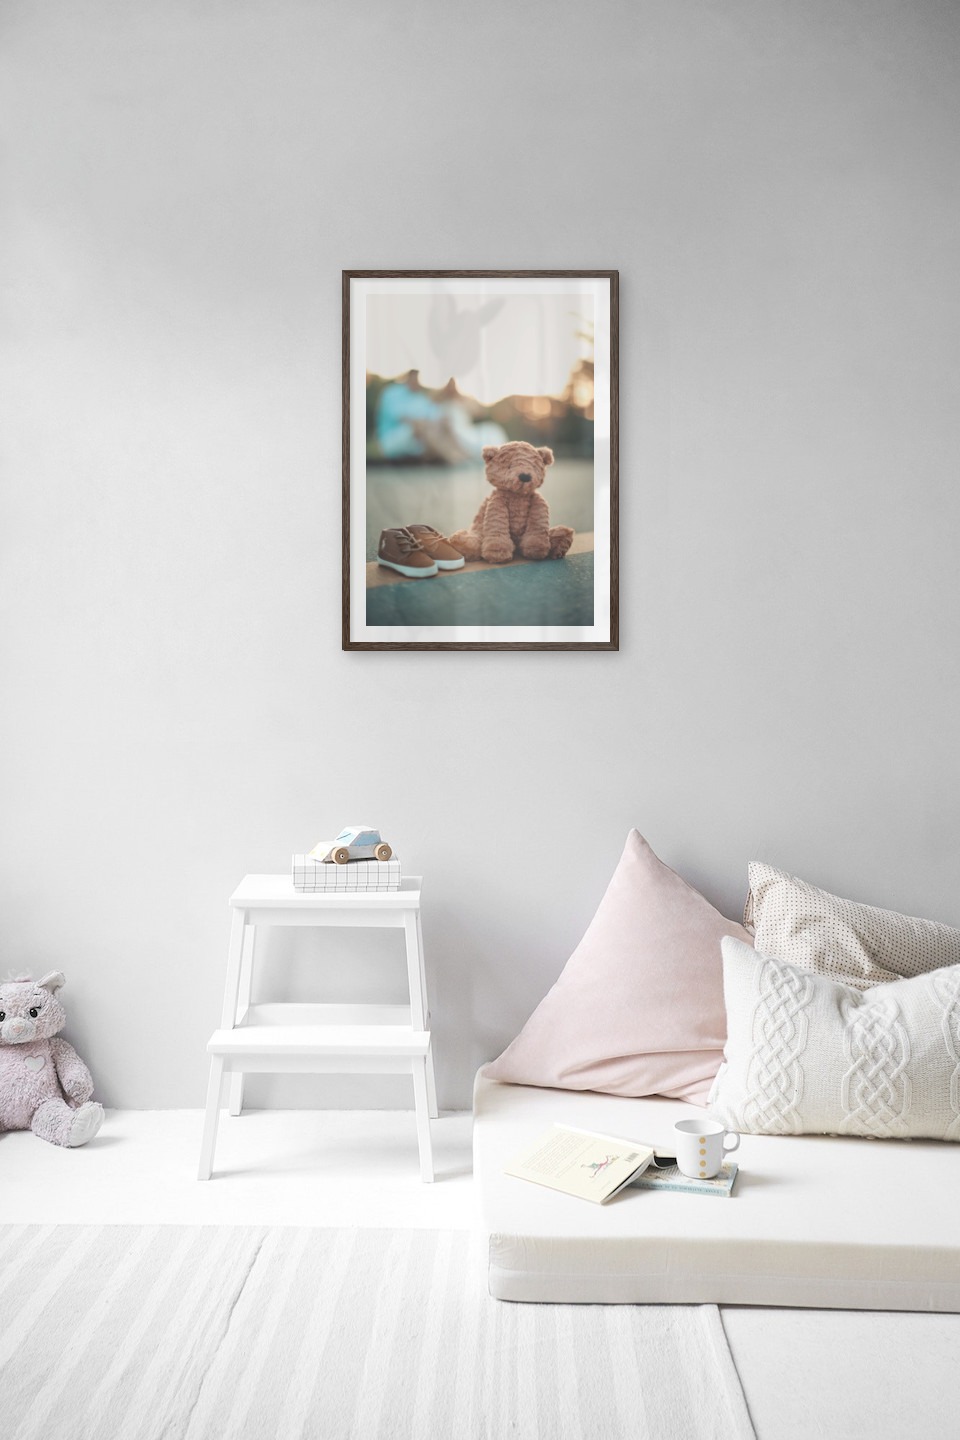 Gallery wall with picture frame in dark wood in size 50x70 with print "Teddy bear on the street"